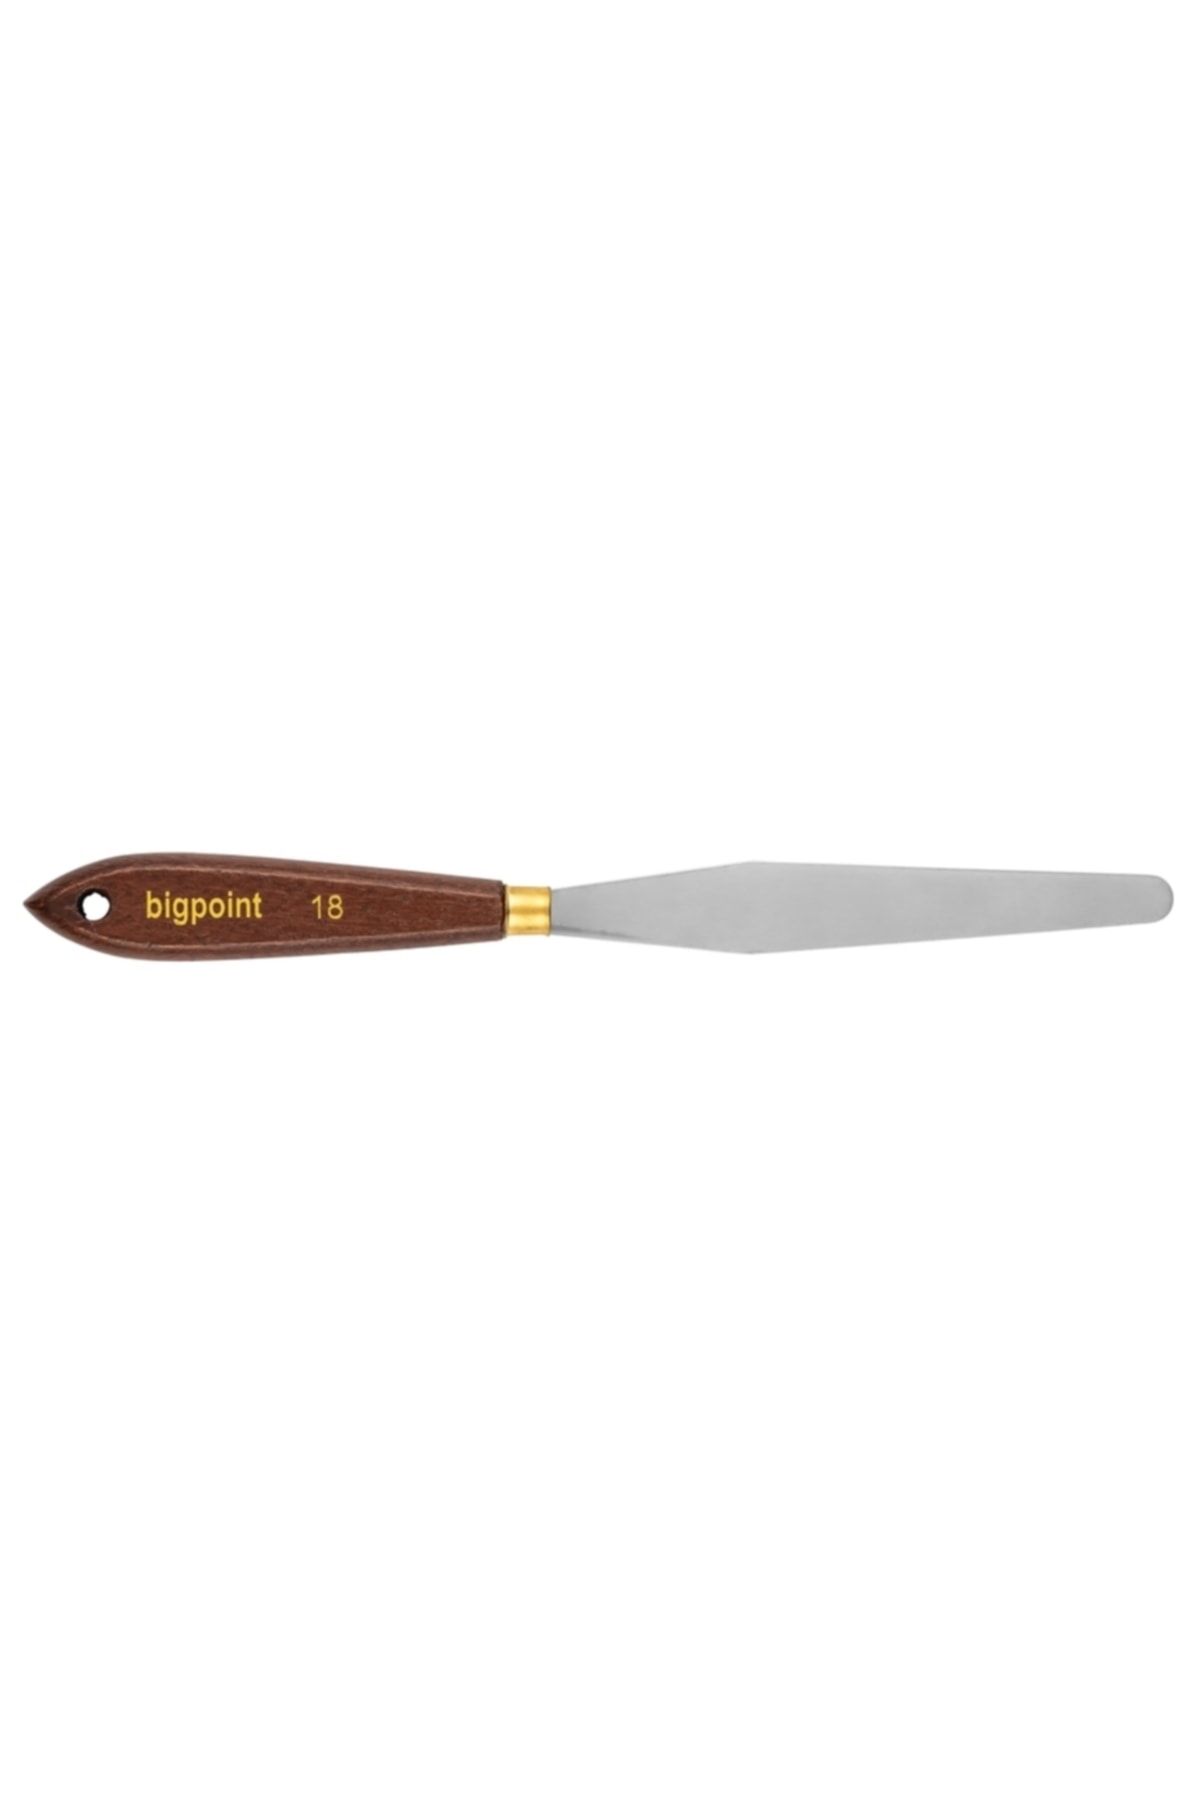 Bigpoint Metal Spatula No: 18 (painting Knife)